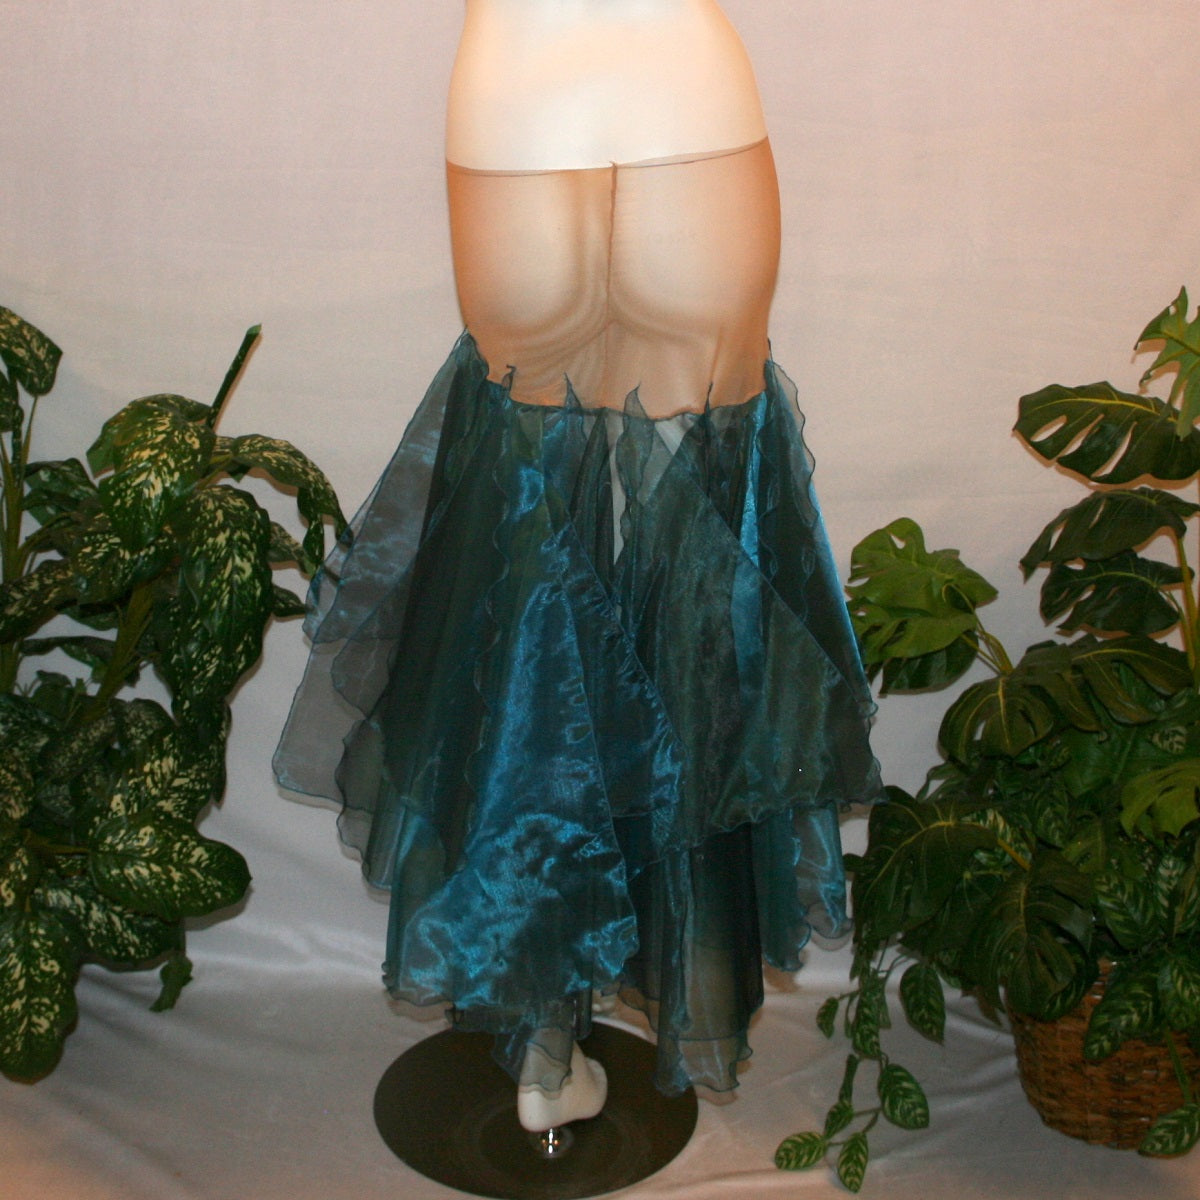 back view of Blue ballroom skirt created with yards of a deep sea blue organza, layers of large petal shaped panels.